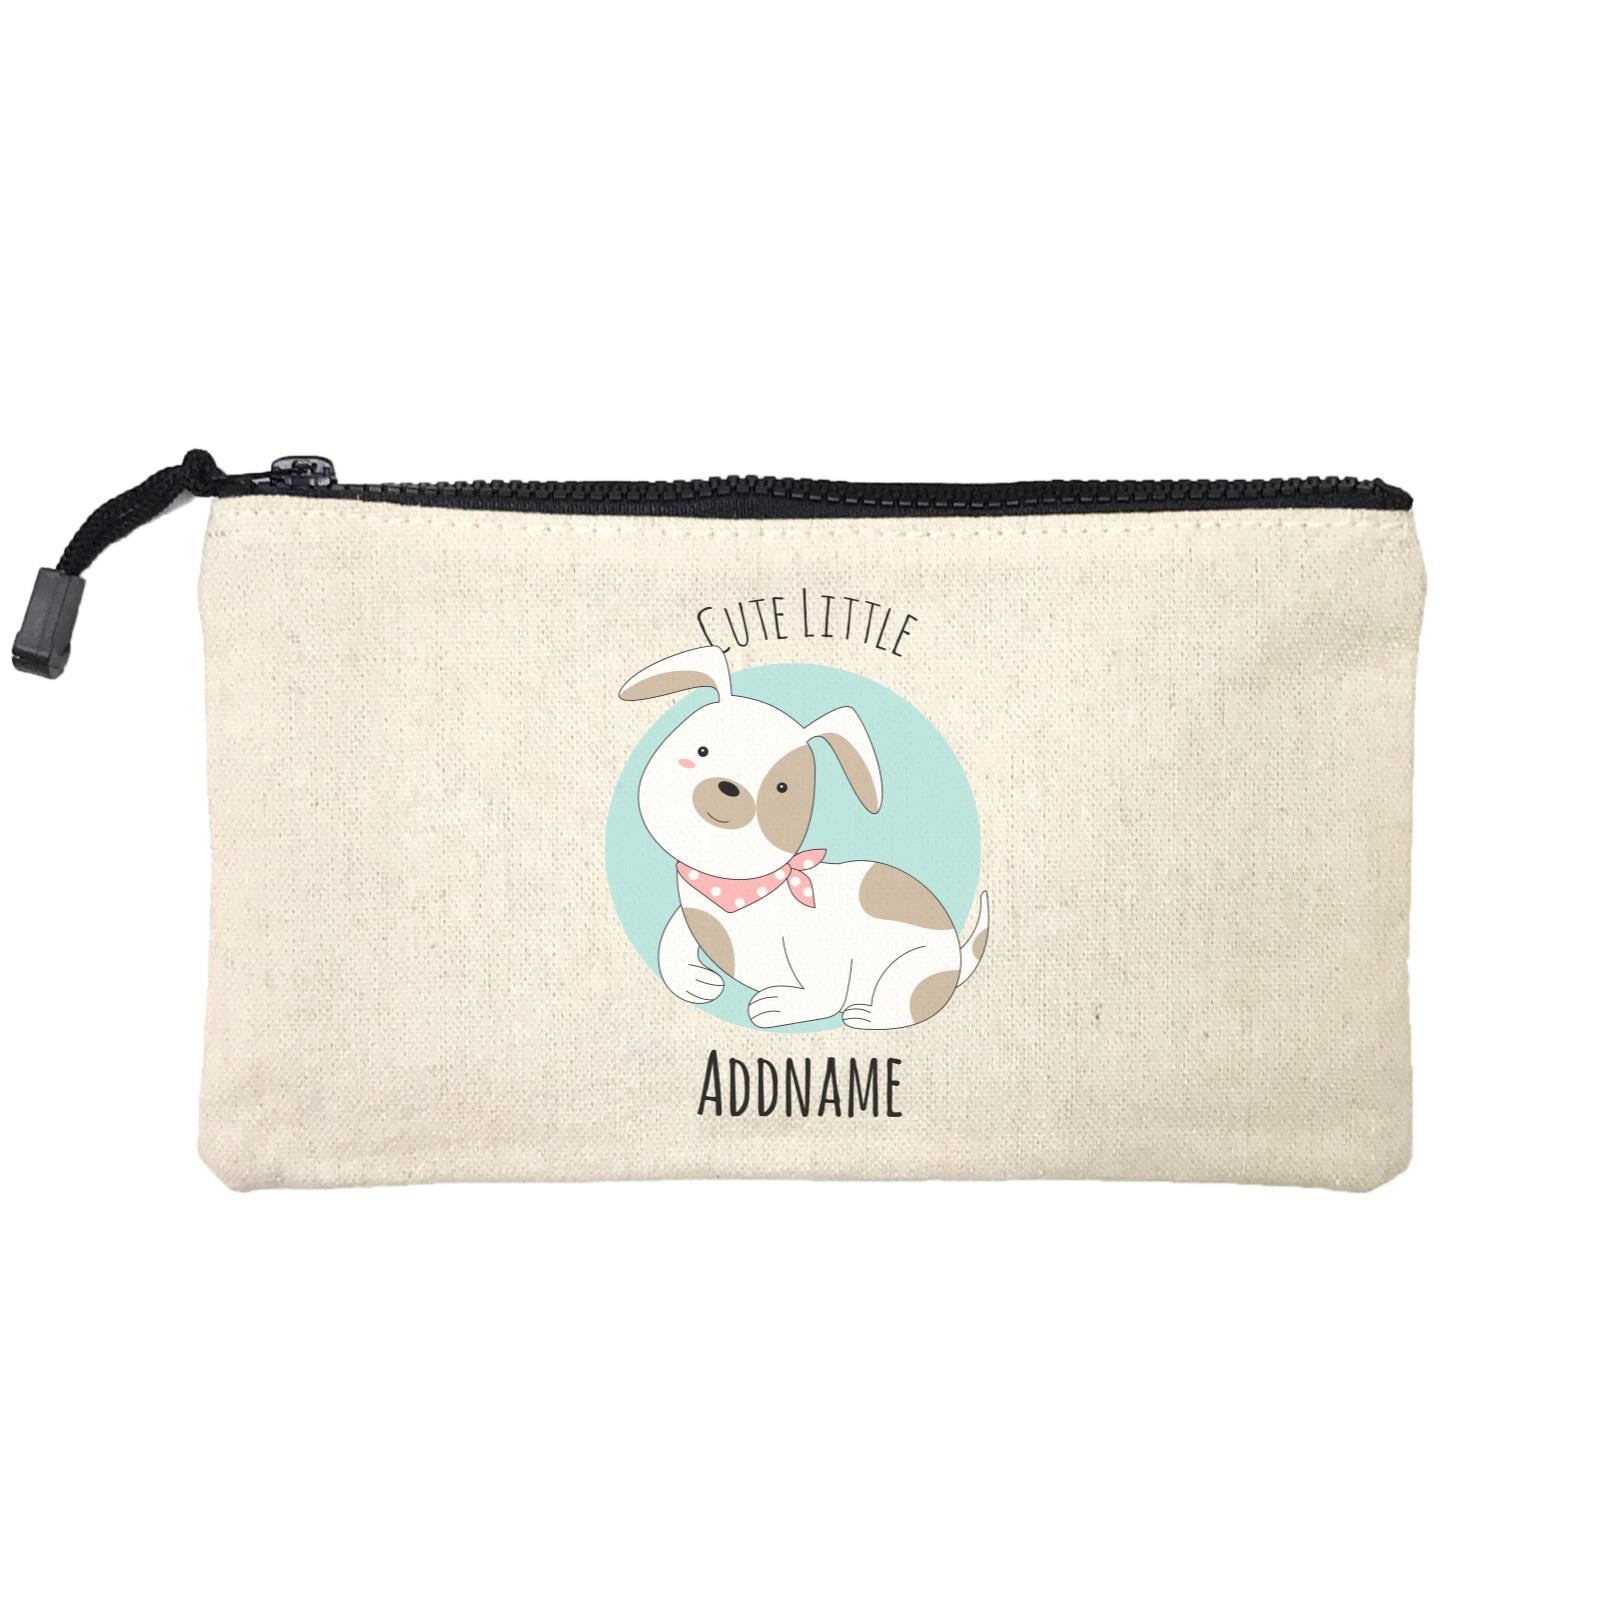 Sweet Animals Sketches Dog Cute Little Addname Mini Accessories Stationery Pouch